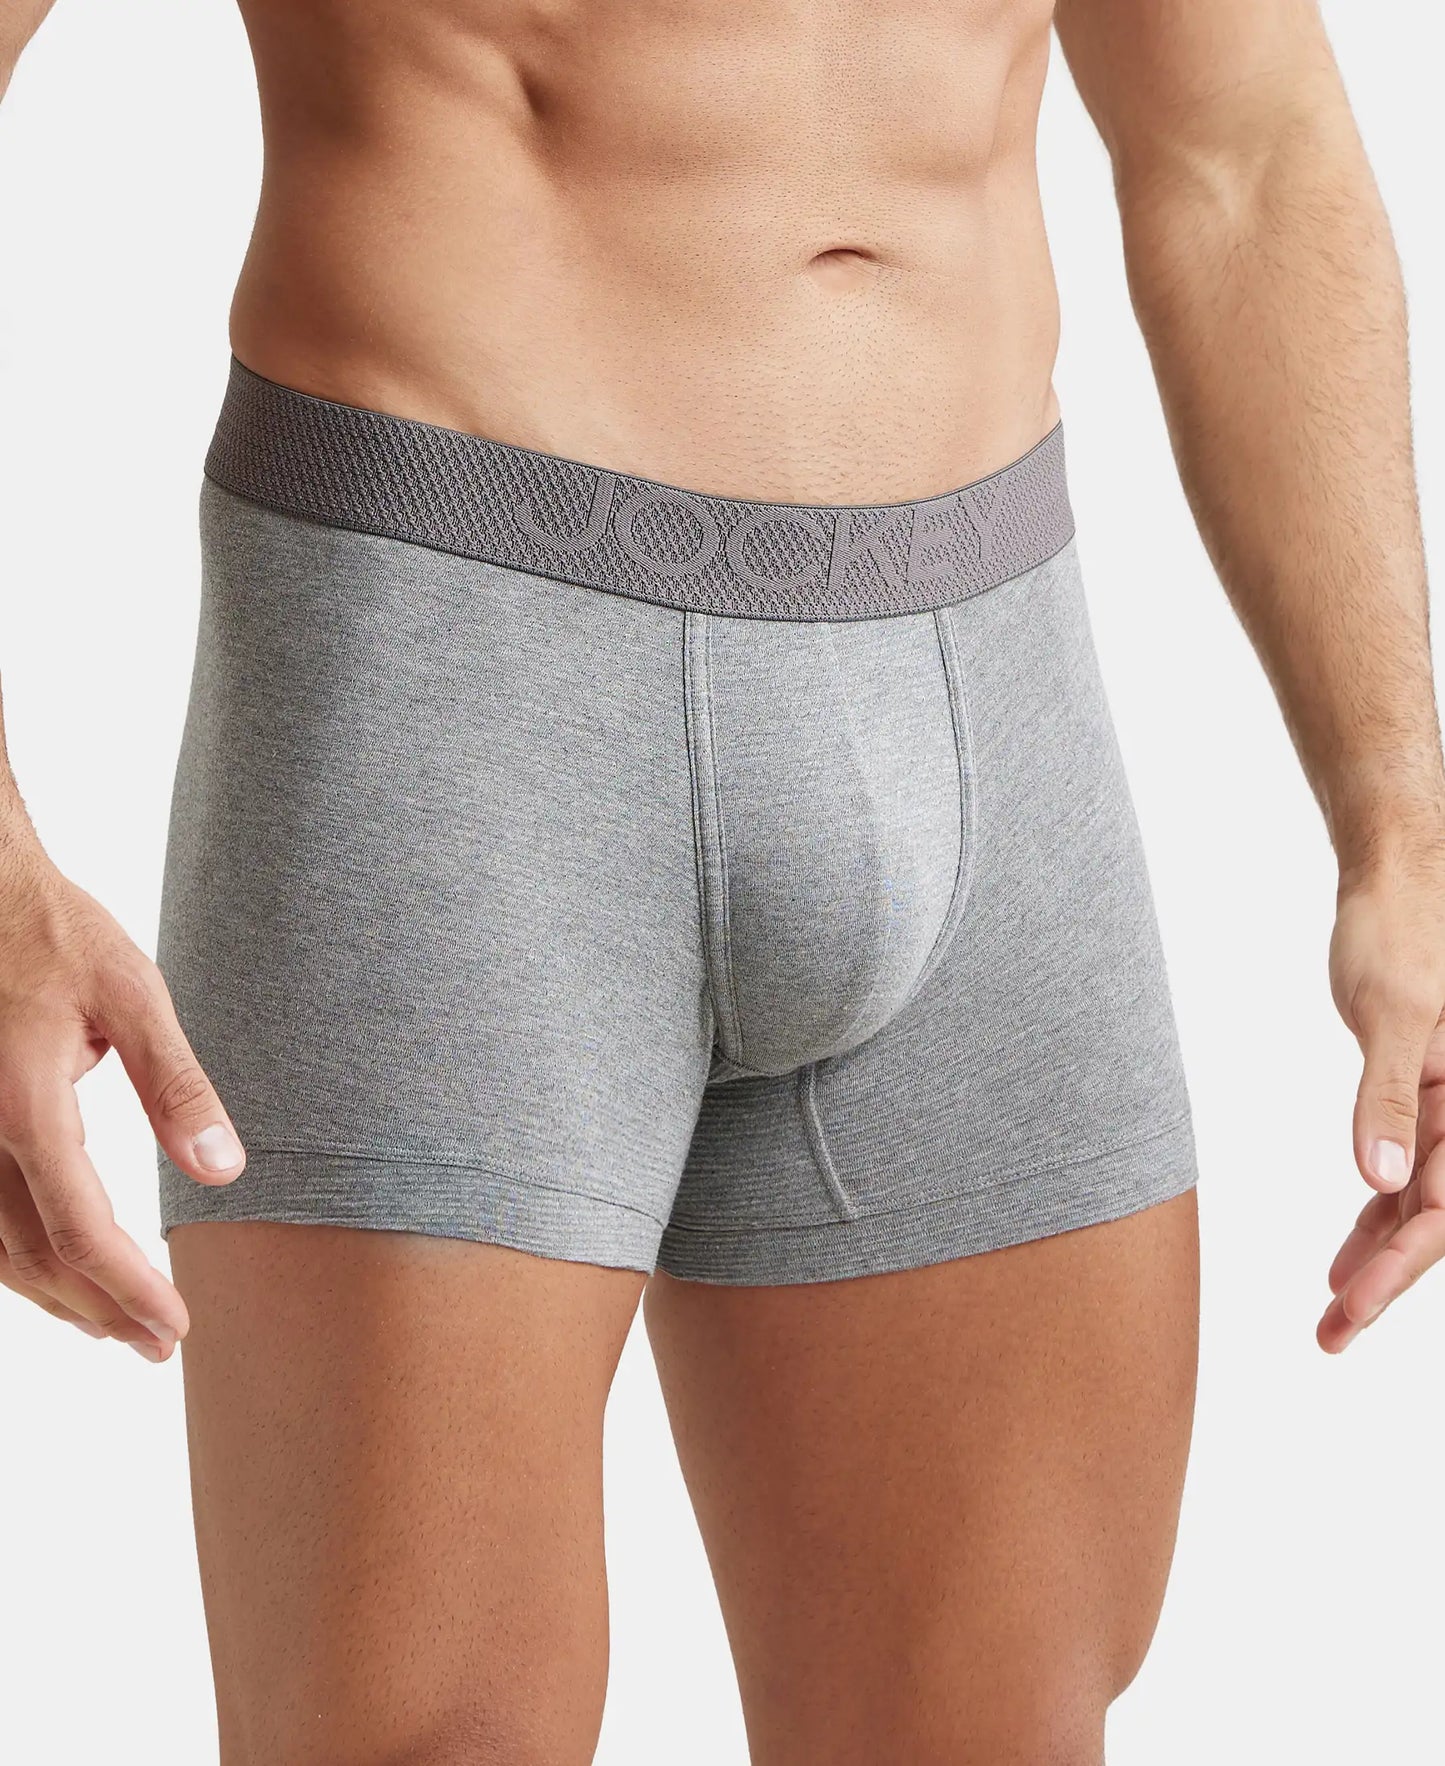 Bamboo Cotton Elastane Breathable Mesh Trunk with StayDry Treatment - Mid Grey Melange-2